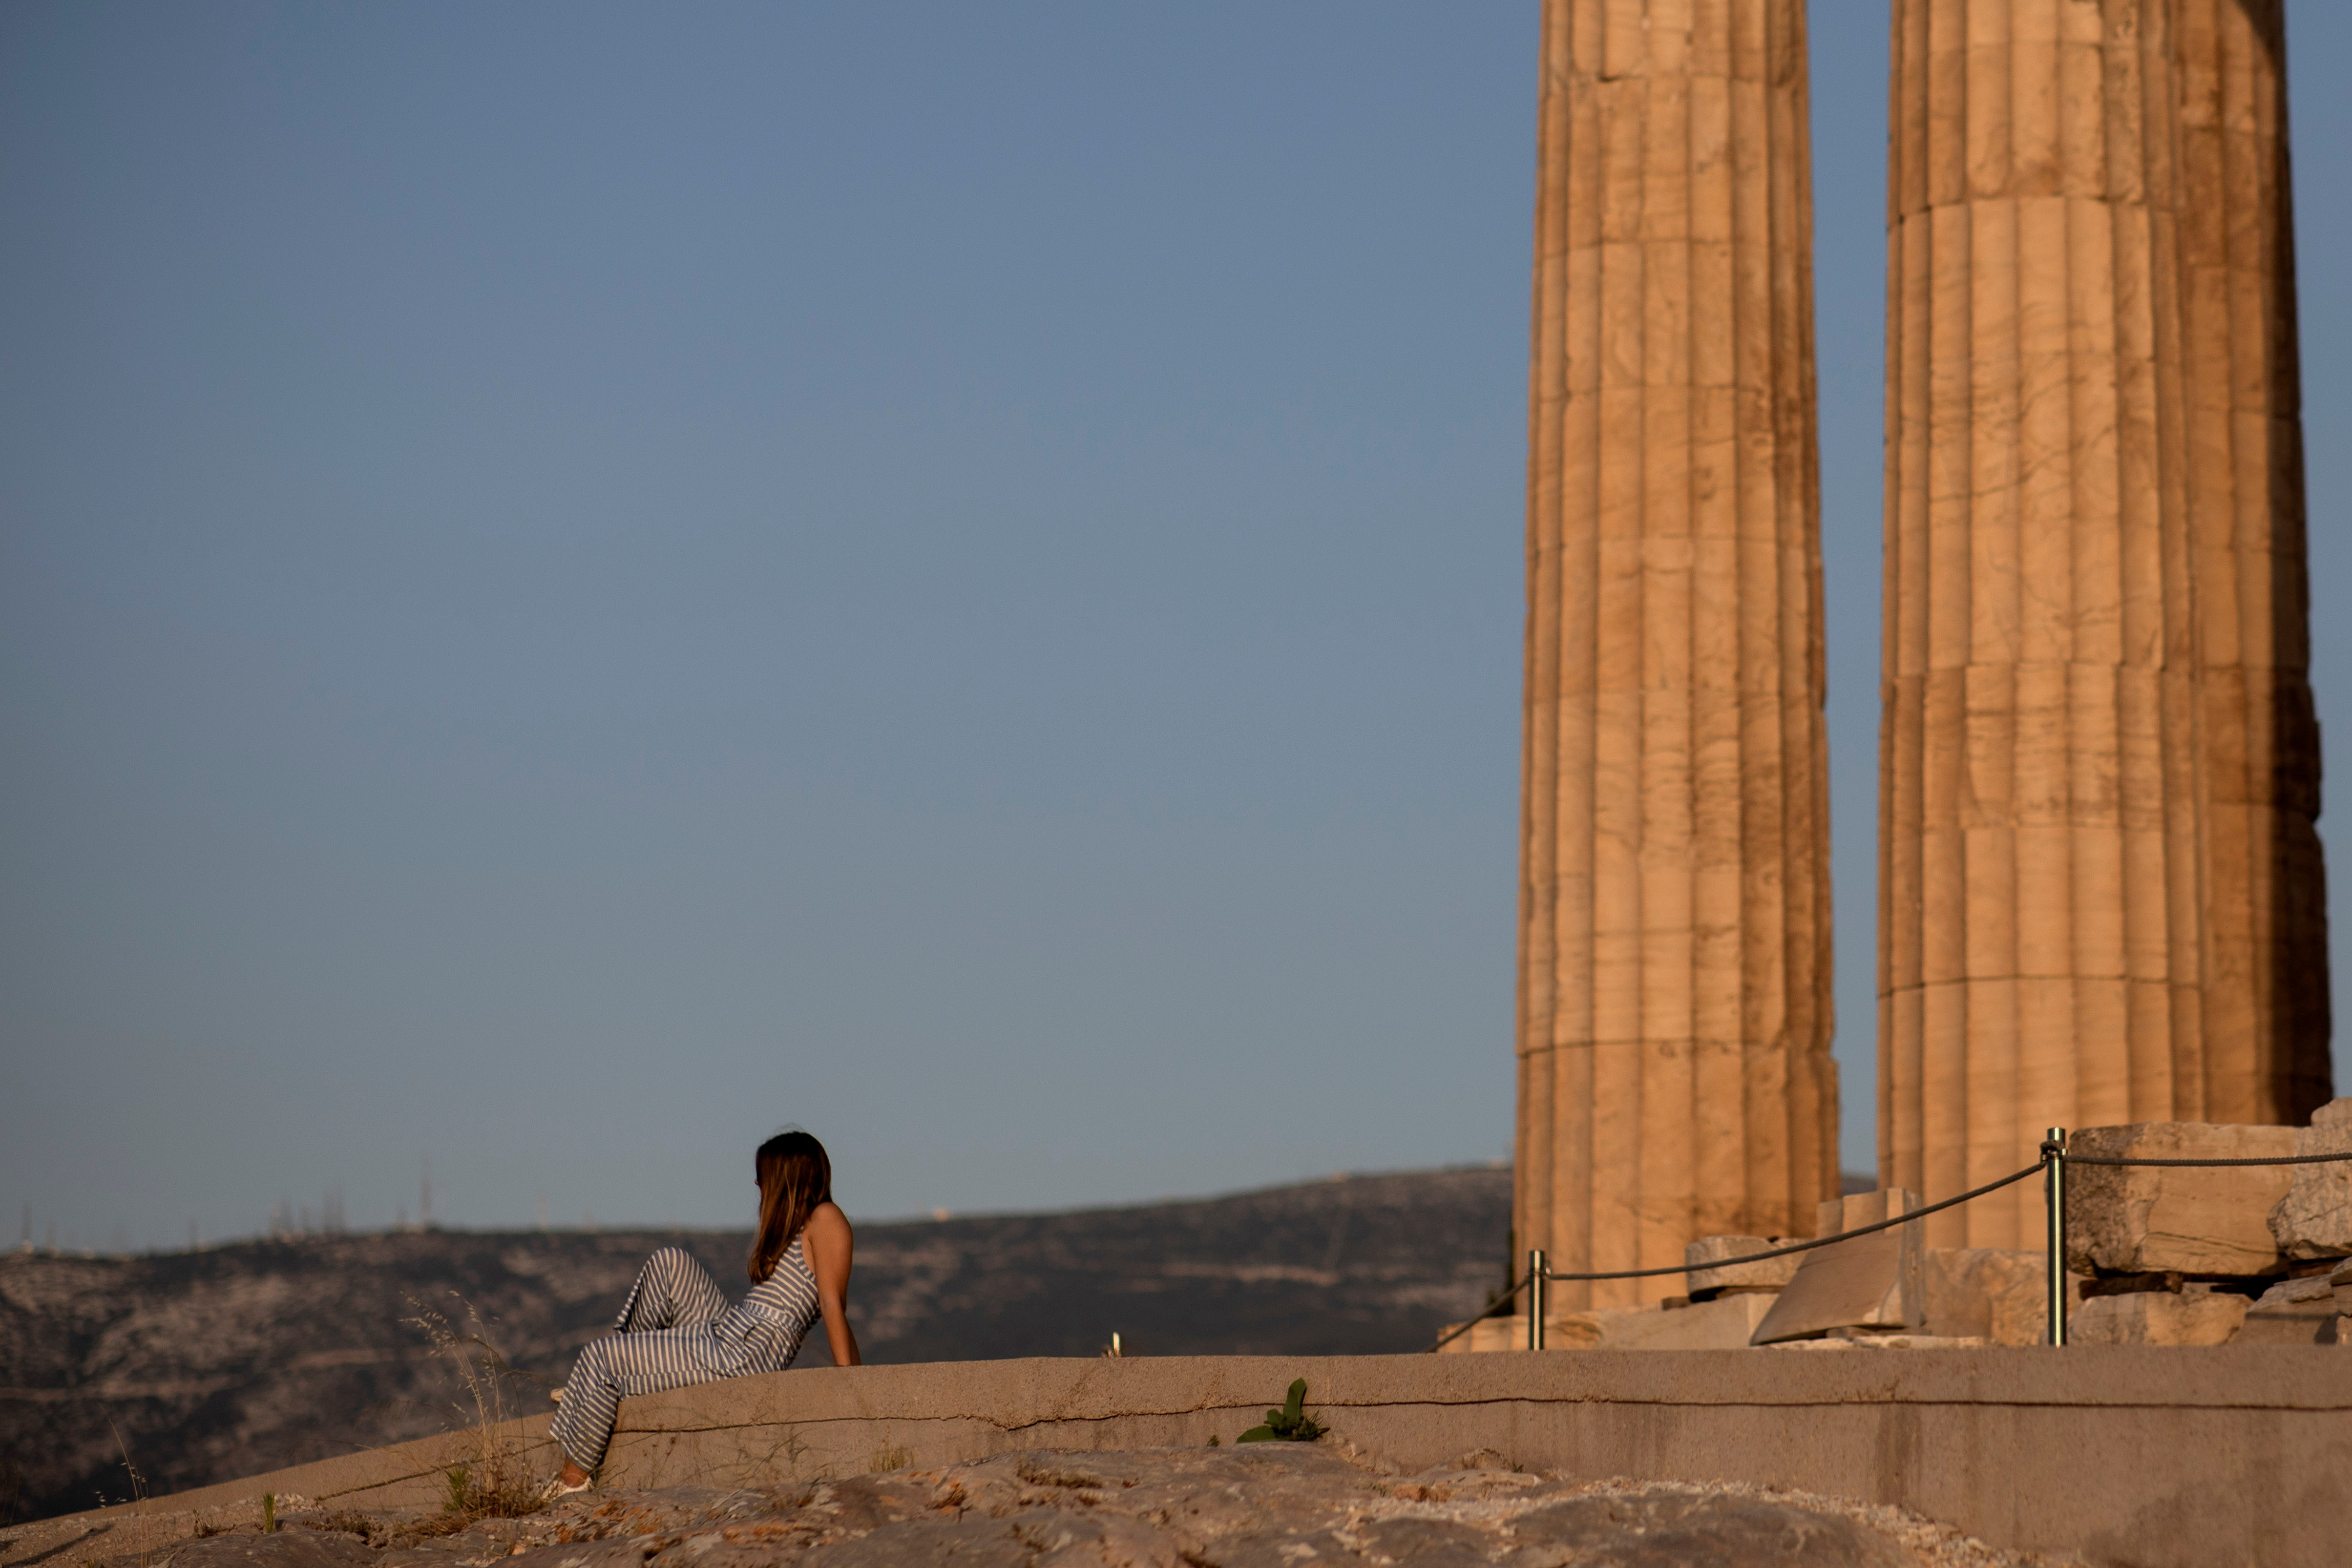 A woman rests on a new cement walkway next to the Parthenon temple, built to improve access for people with disabilities atop the Acropolis hill, in Athens